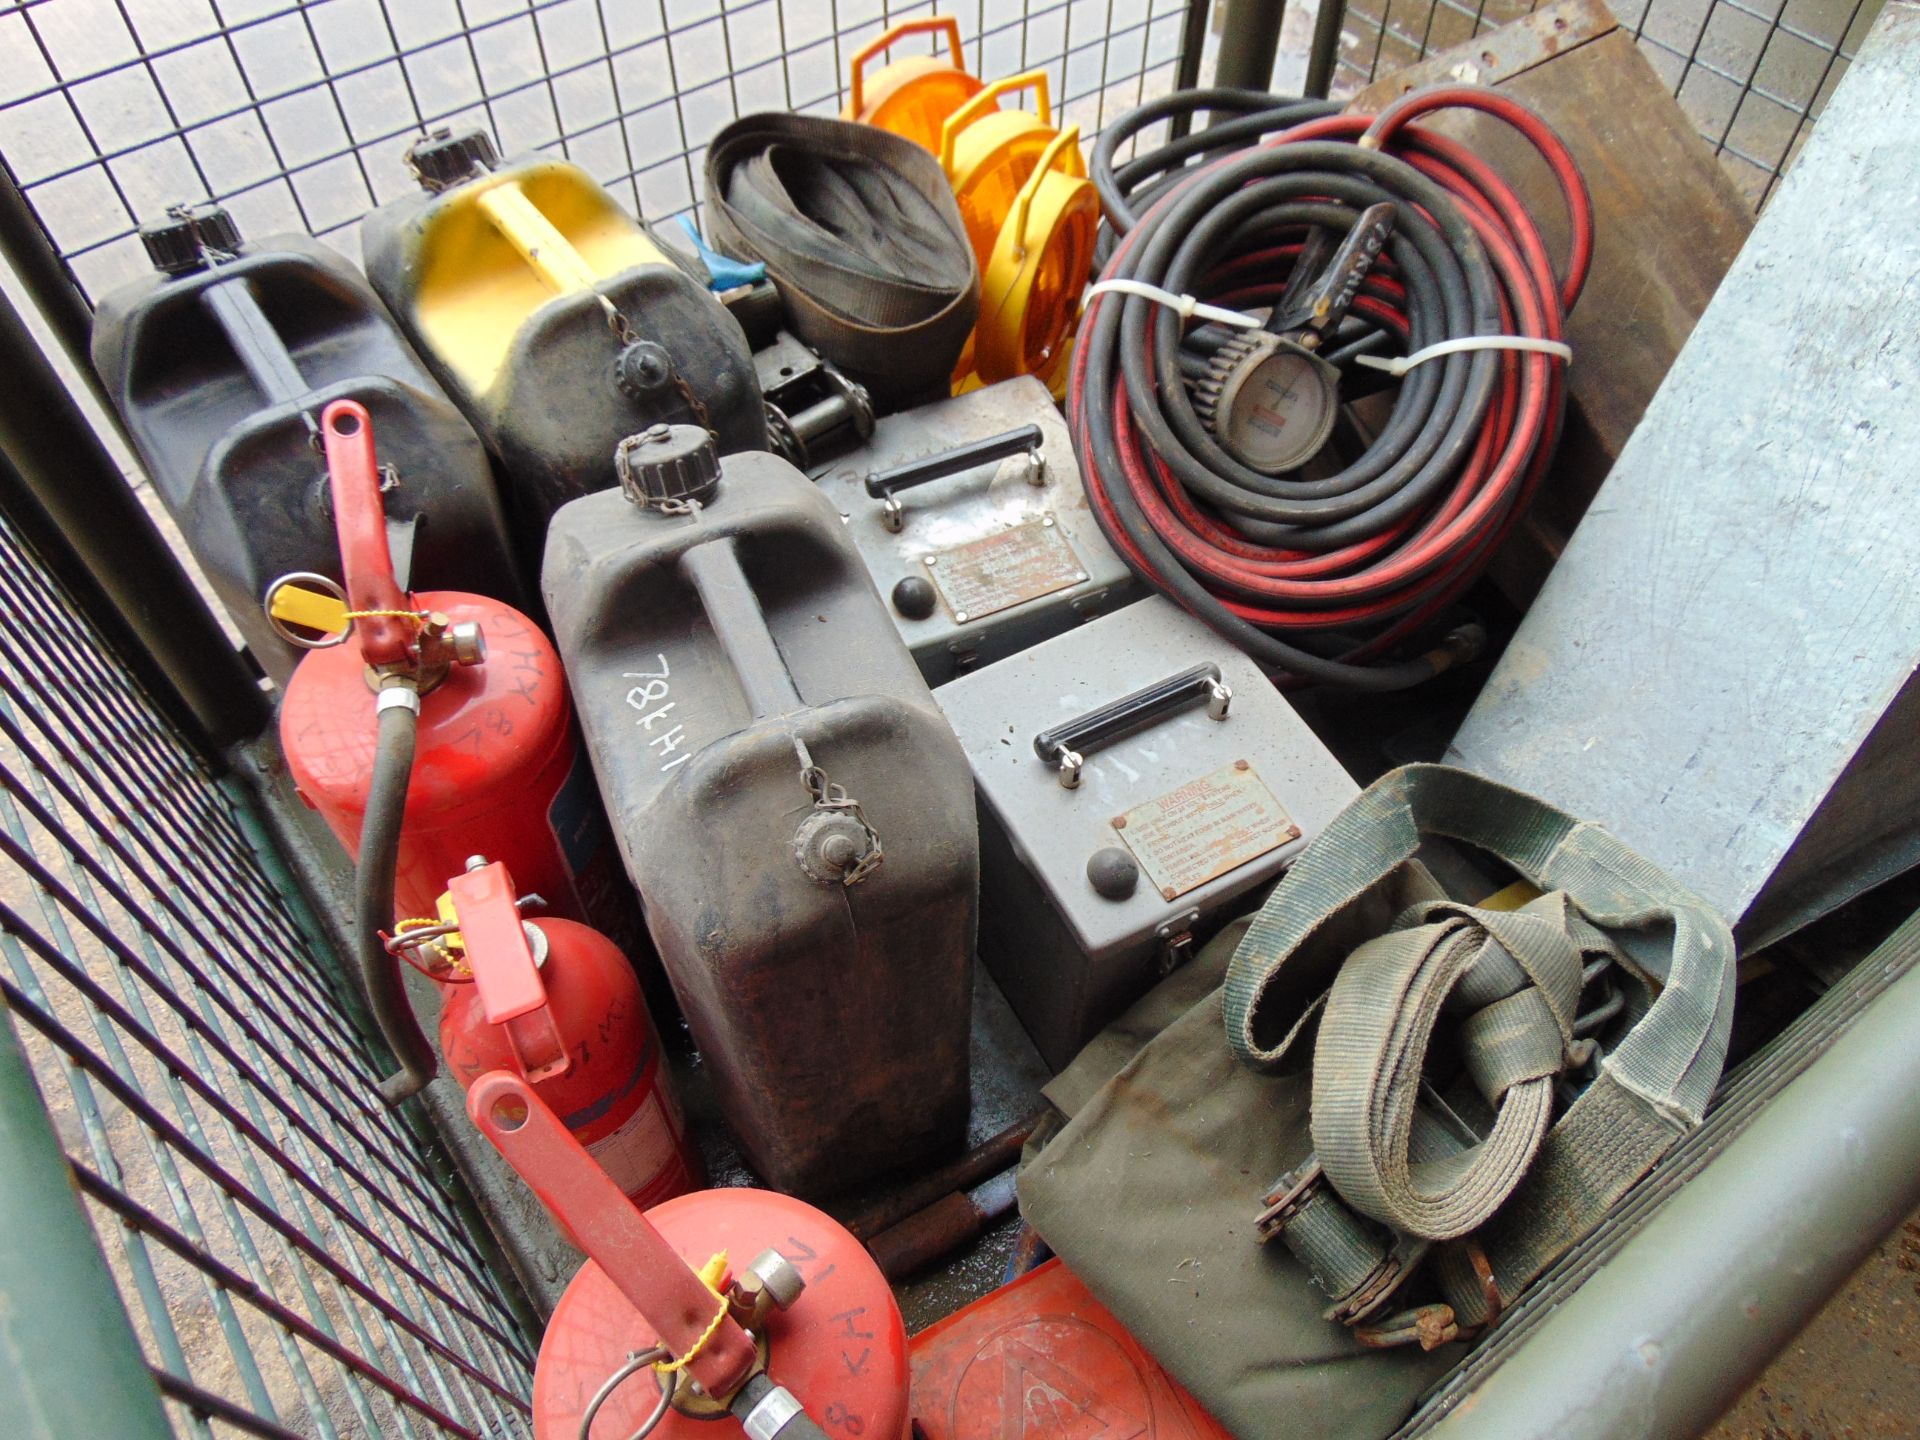 1 x Stillage Air Lines Wheel Chocks, Jerry Cans, Cooking Vessels, Ratchet Straps, Fire Extinguisher - Image 2 of 6